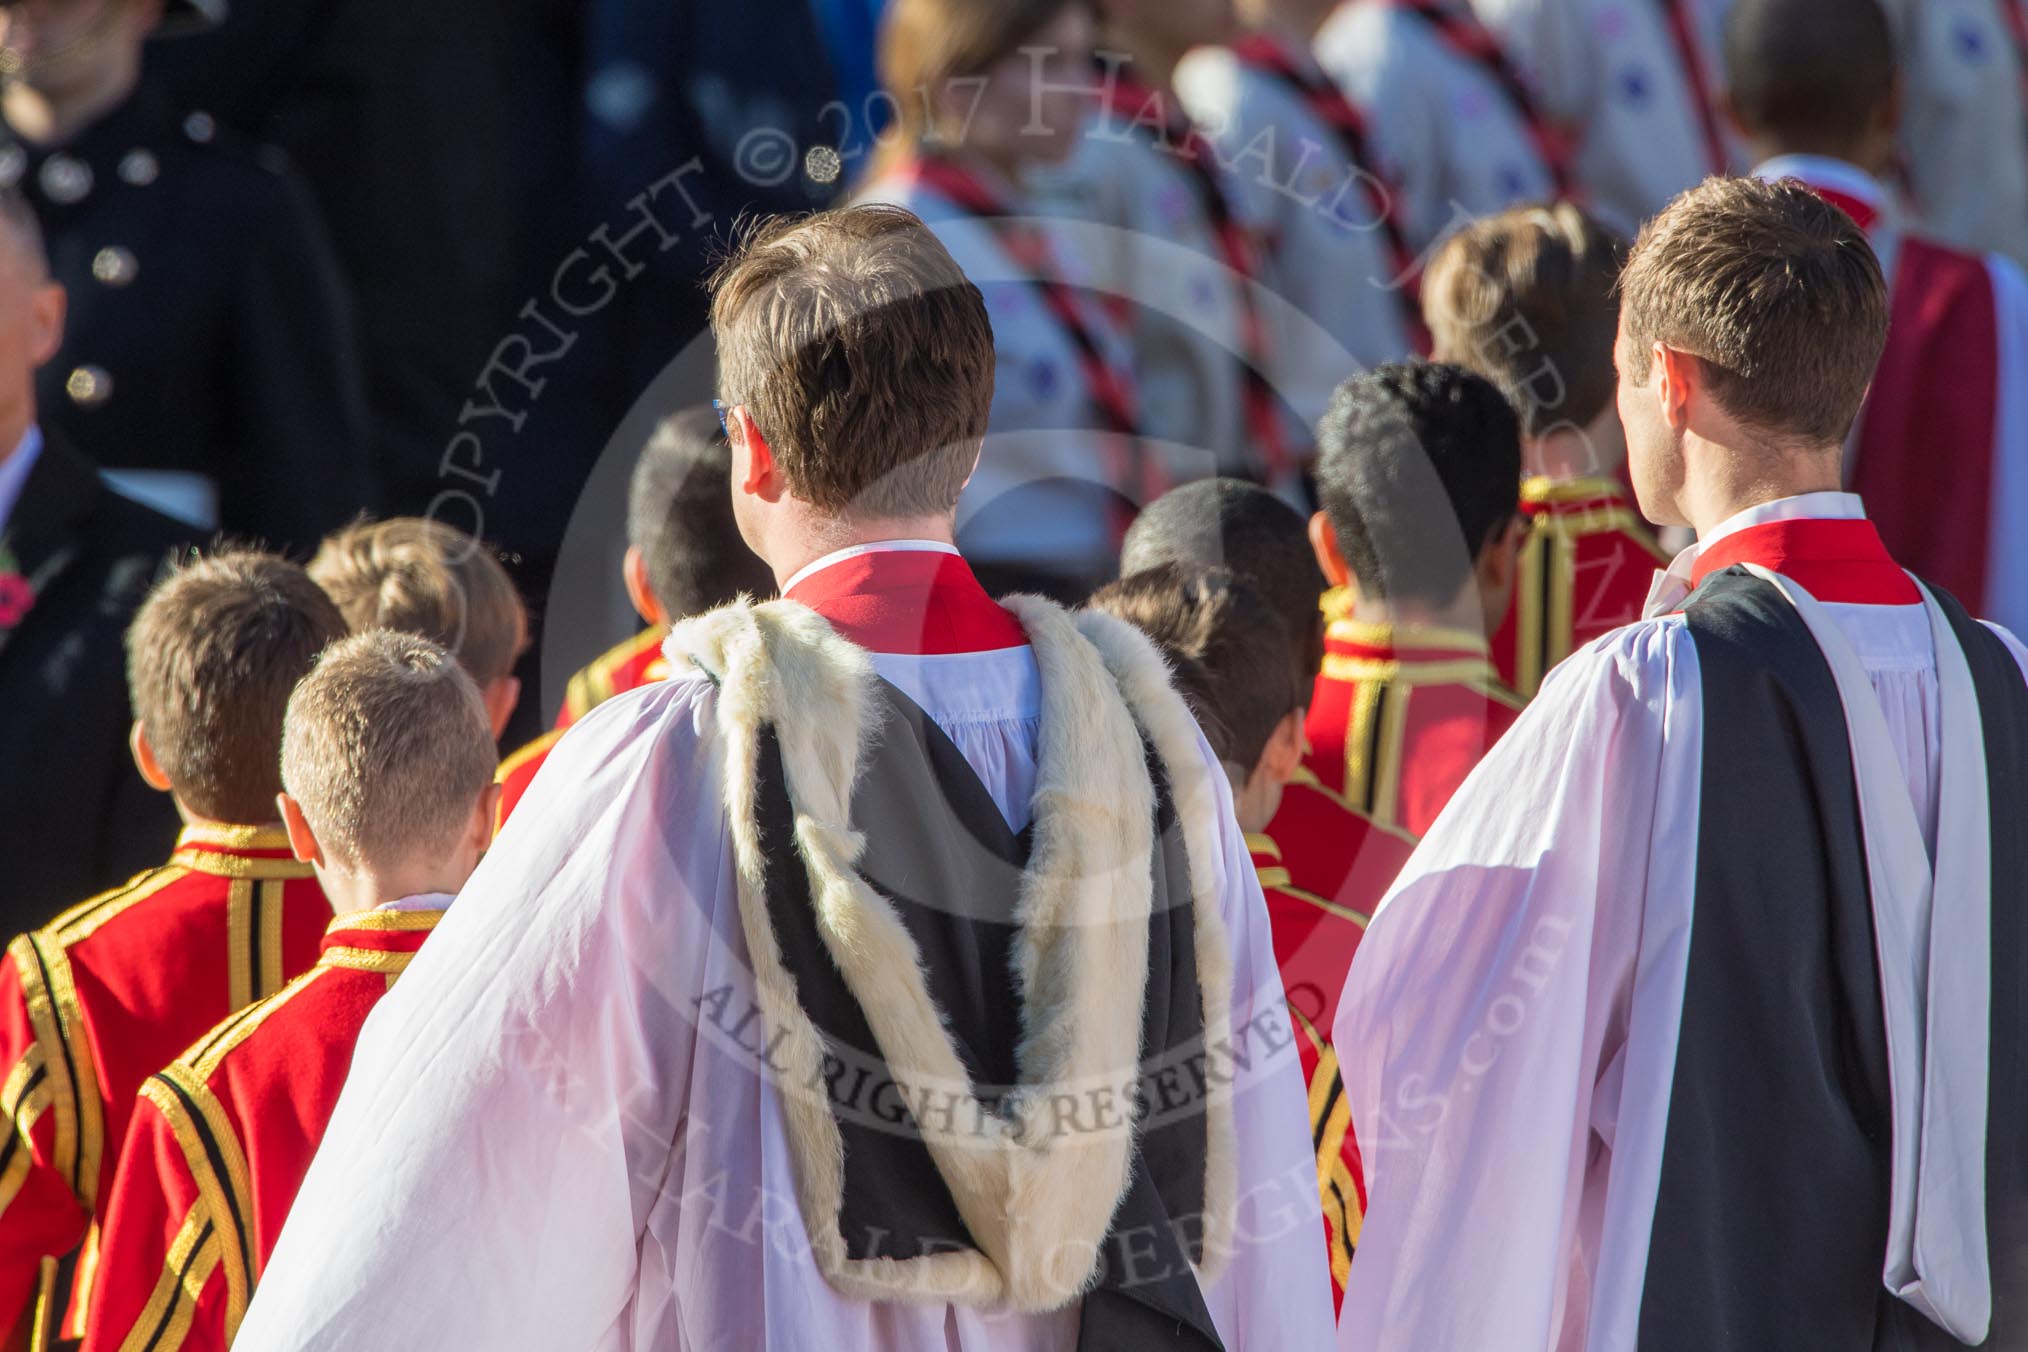 The choir, followed by 6 Gentlemen-in-Ordinary, returning to the Foreign and Commonwealth Office during Remembrance Sunday Cenotaph Ceremony 2018 at Horse Guards Parade, Westminster, London, 11 November 2018, 11:24.